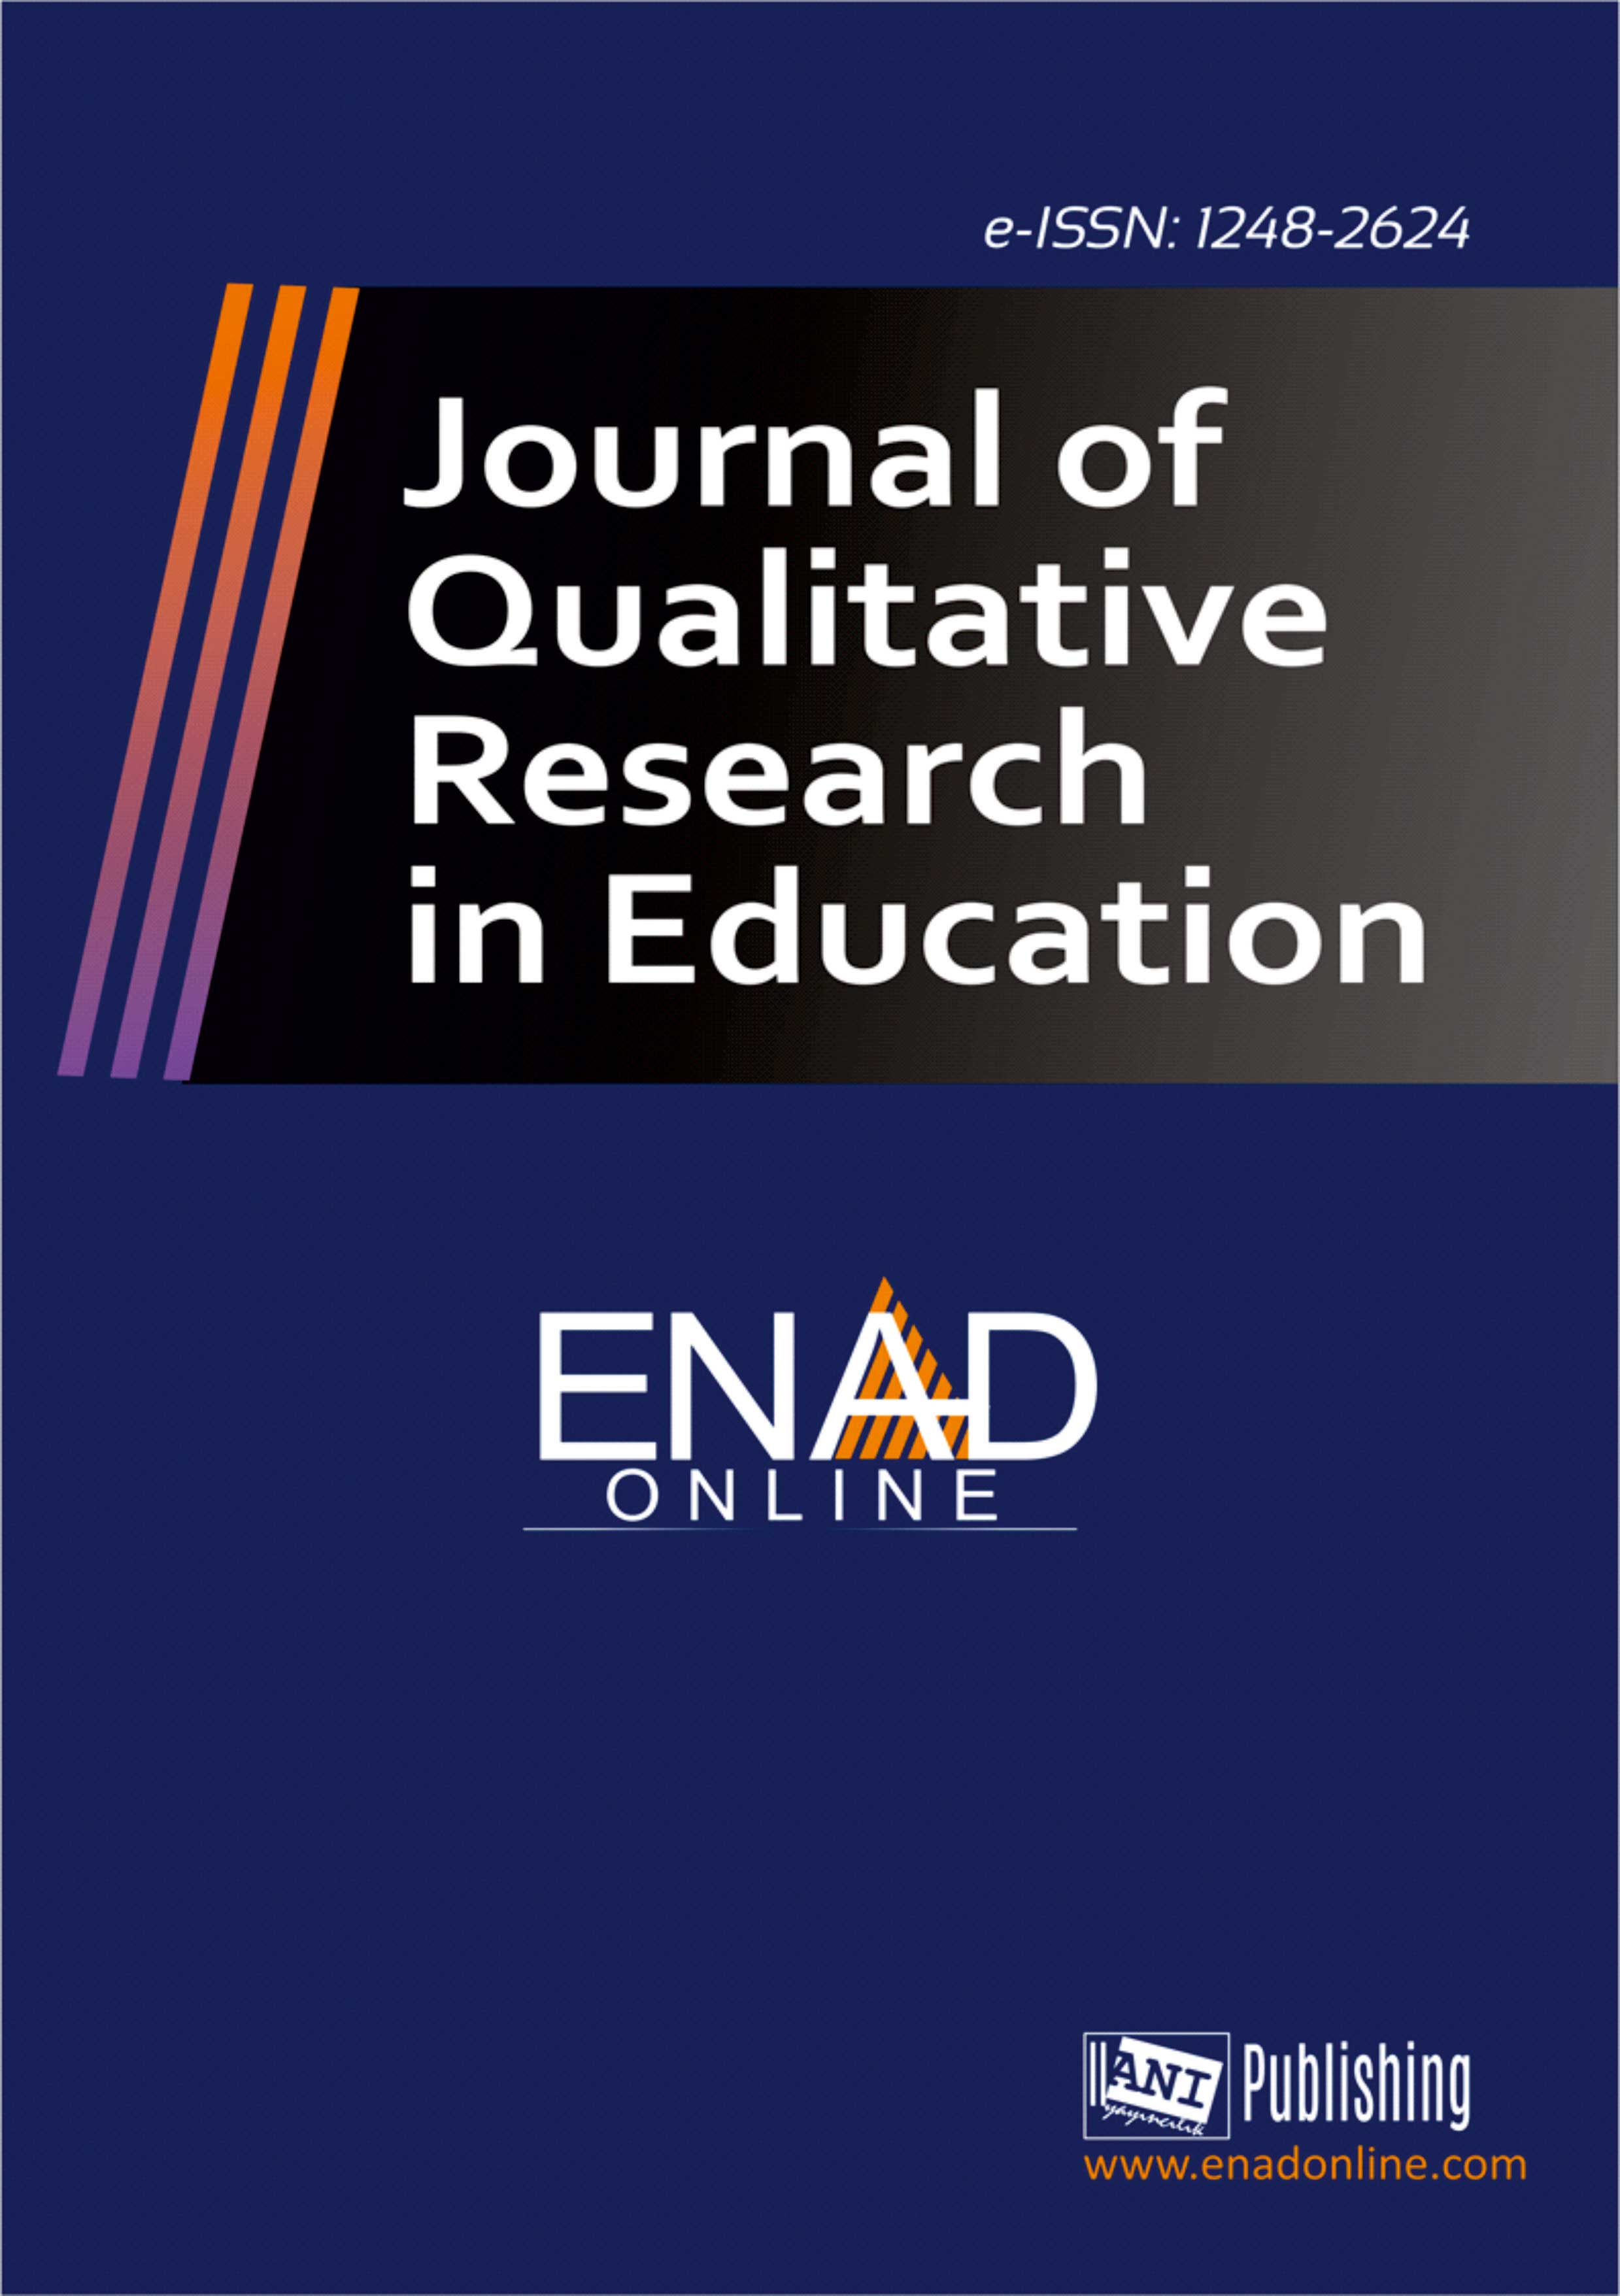 					View Issue 28 (2021): Journal of Qualitative Research in Education
				